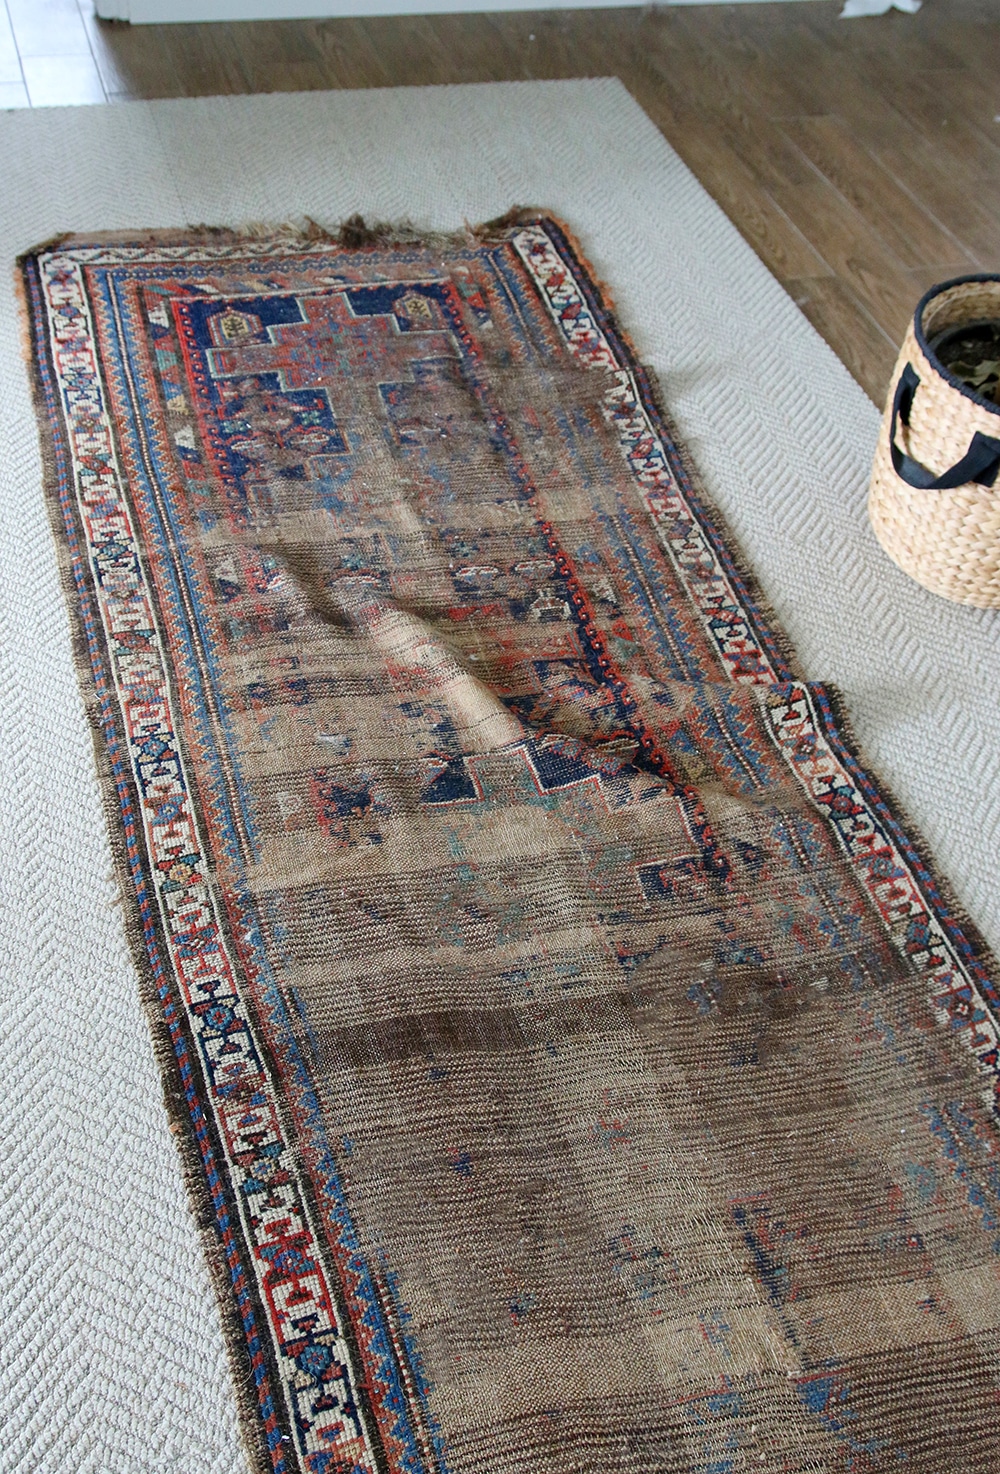 5 Tips For Keeping Area Rugs Exactly, Best Pads For Area Rugs On Hardwood Floors